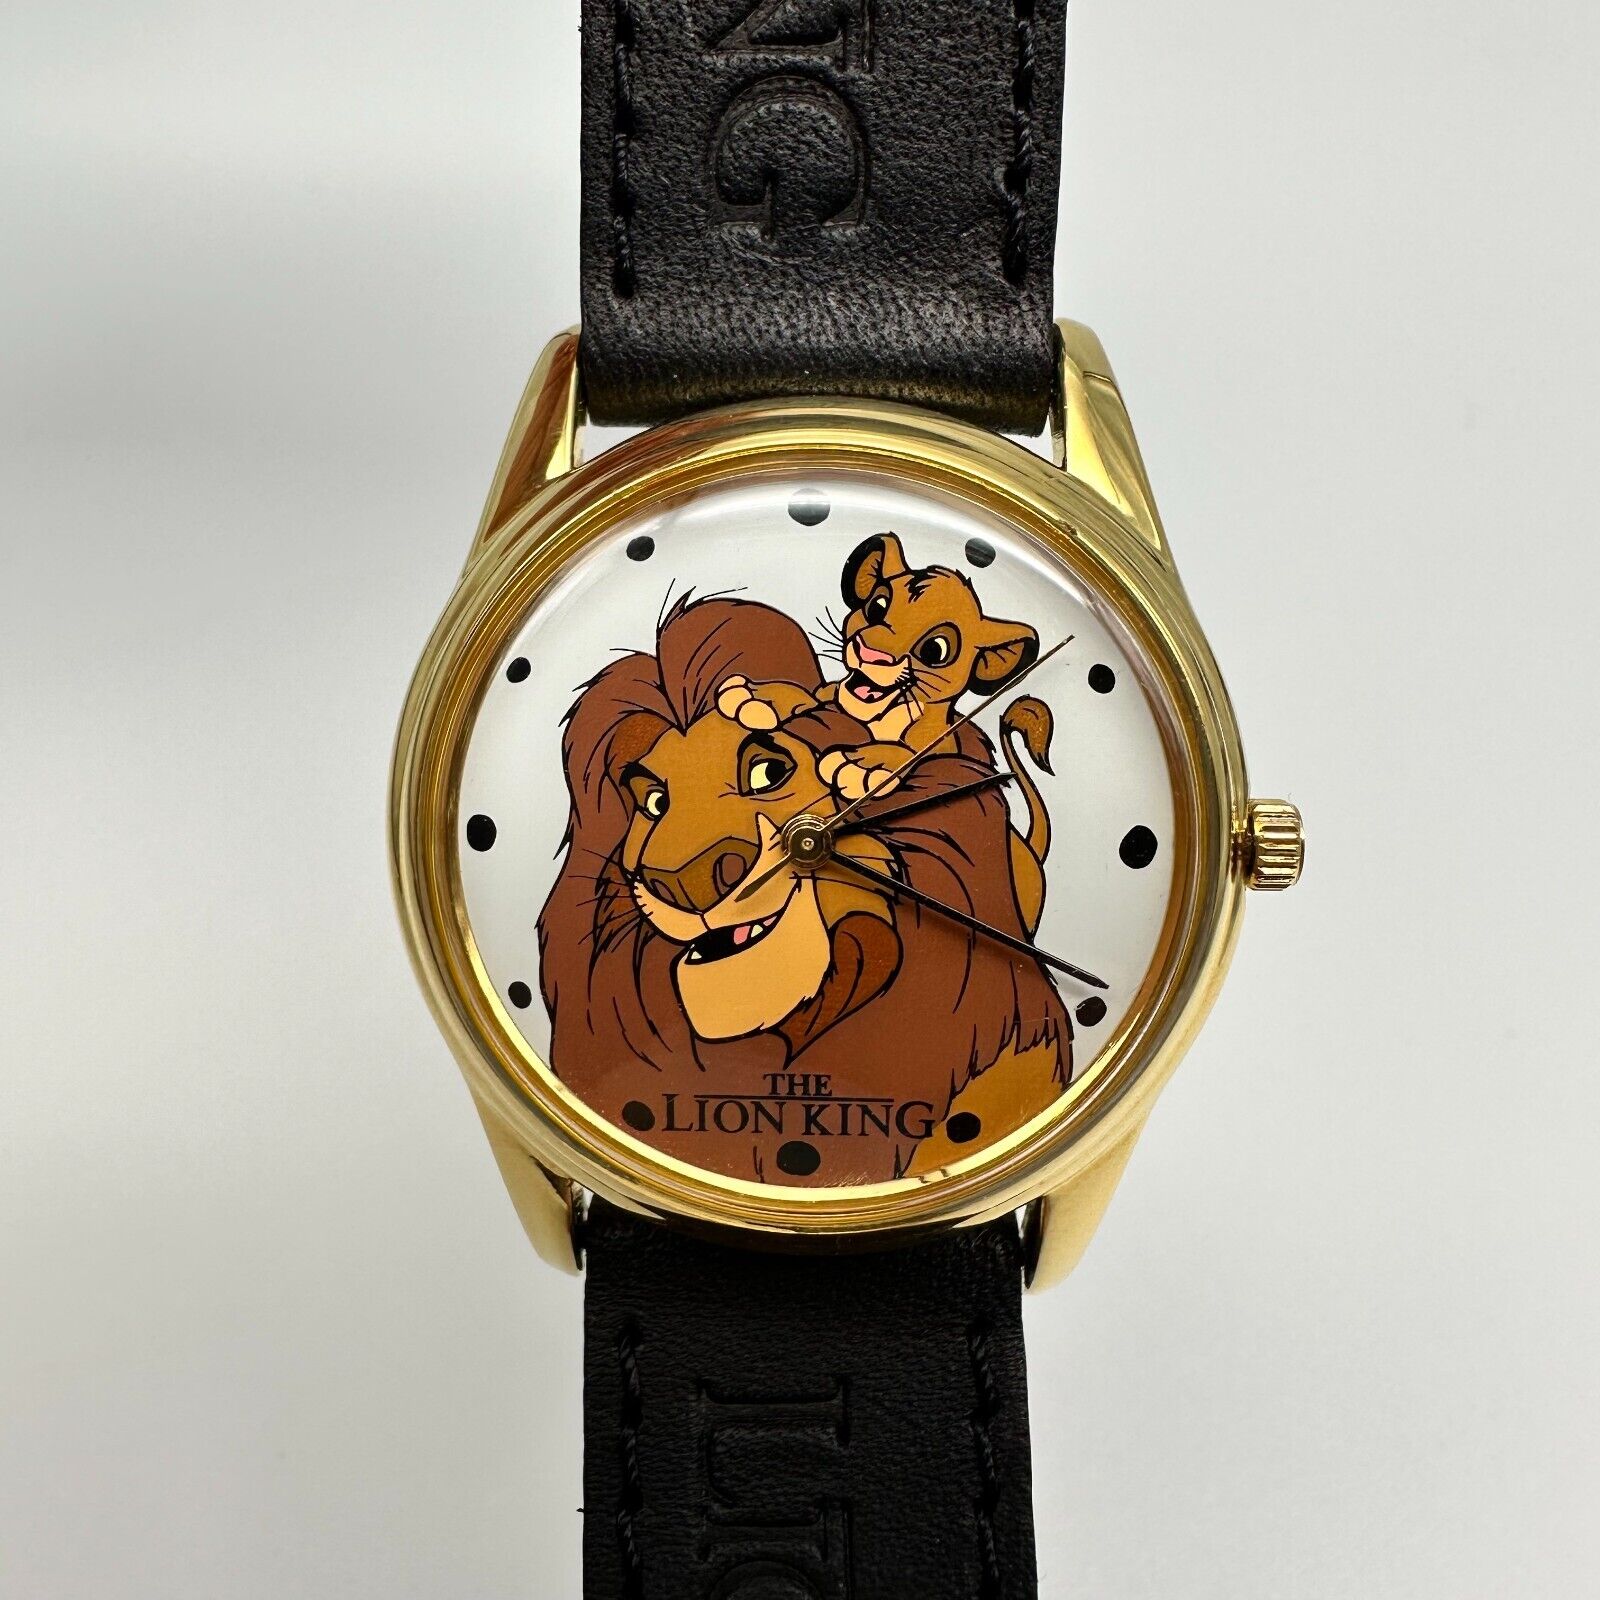 Vintage Timex Disney The Lion King Gold Tone Watch Black Leather Band - New